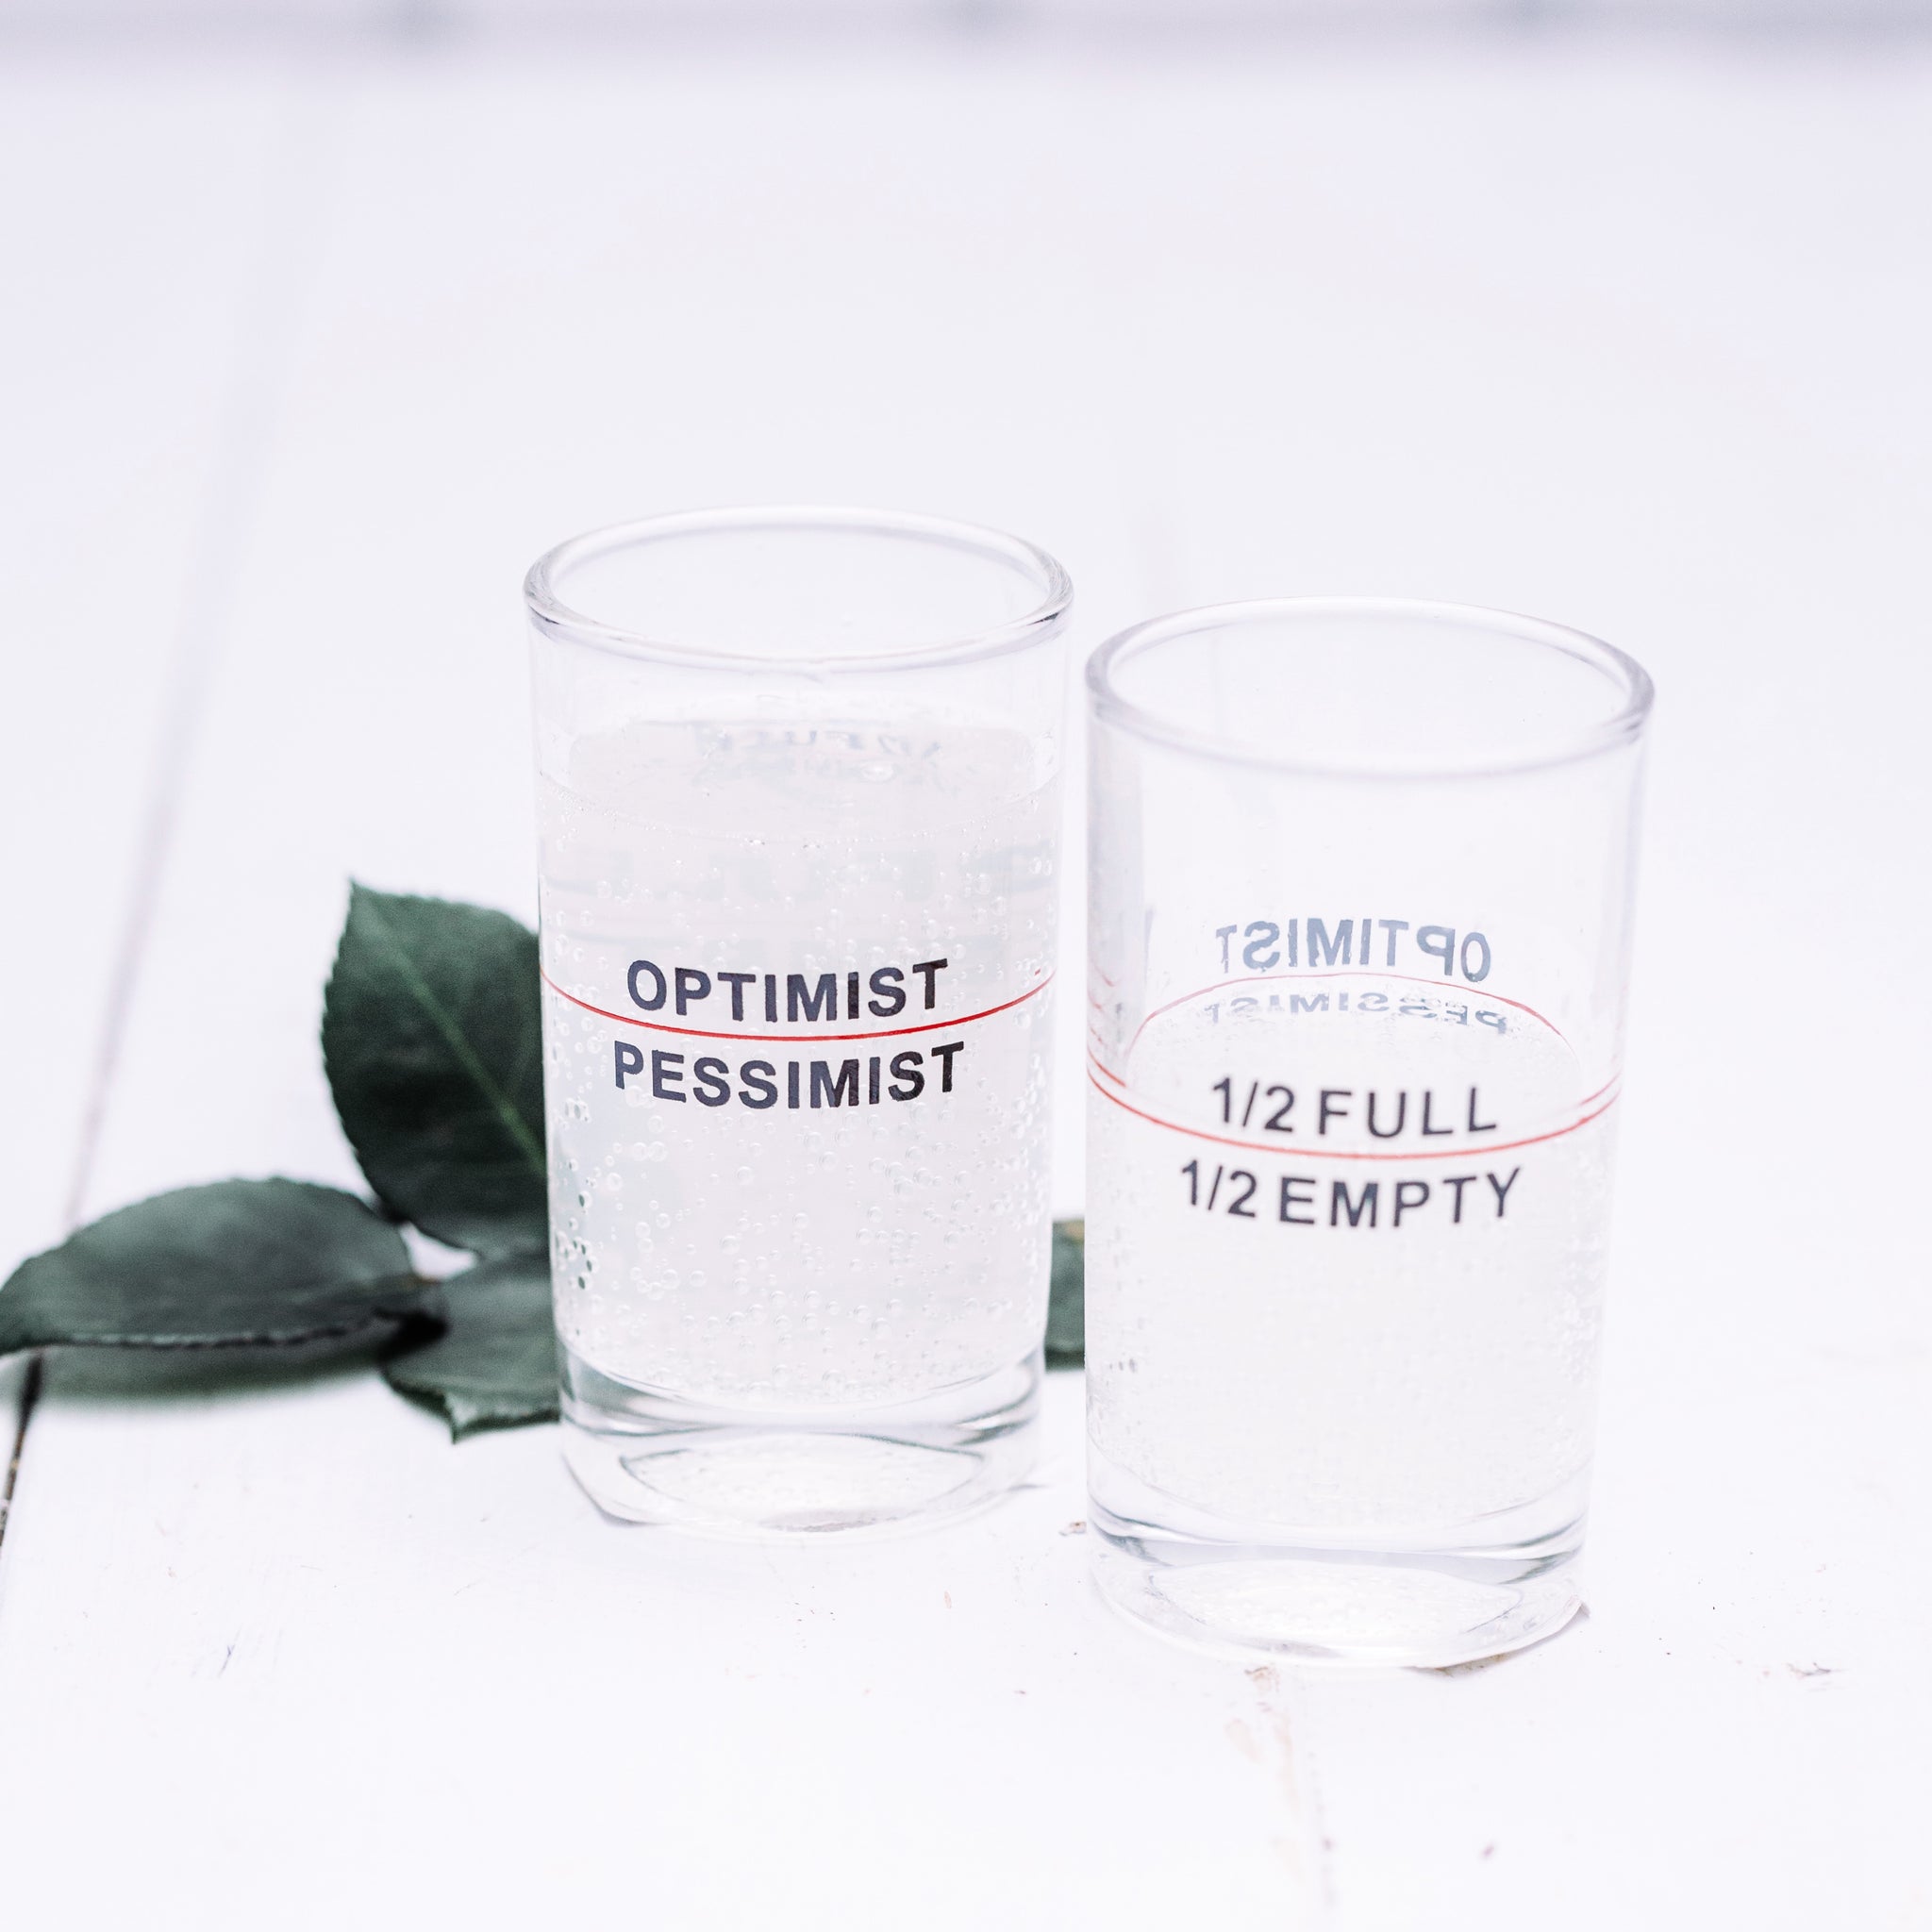 Is the Glass Half-Full or Half-Empty?